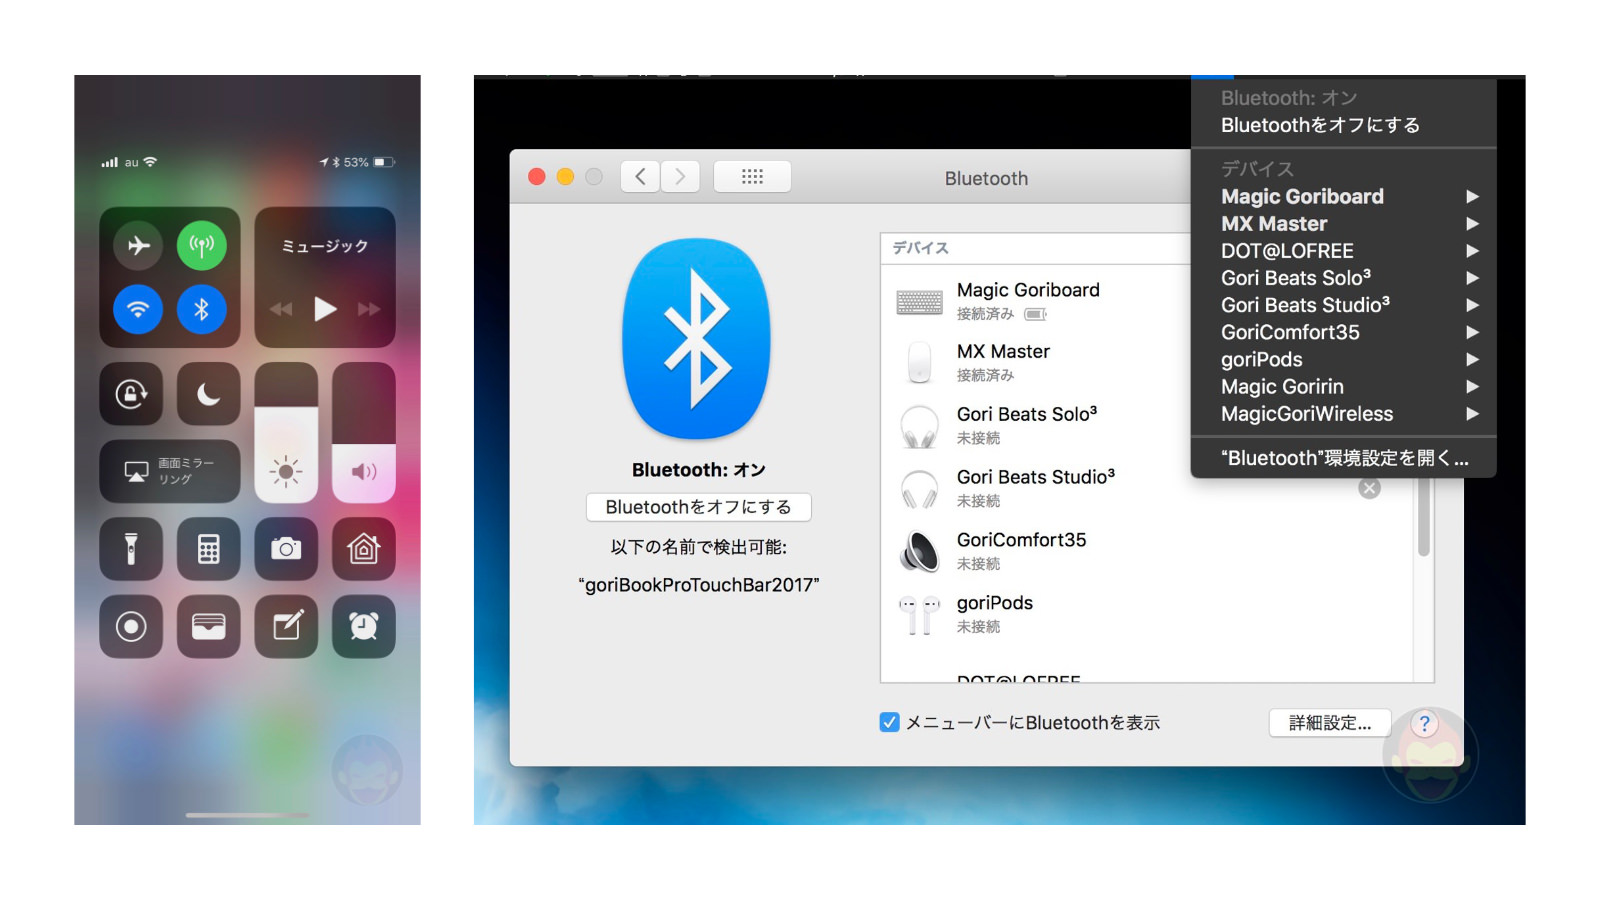 Wi-Fi-and-Bluetooth-Settings-for-mac-and-iphone.jpg